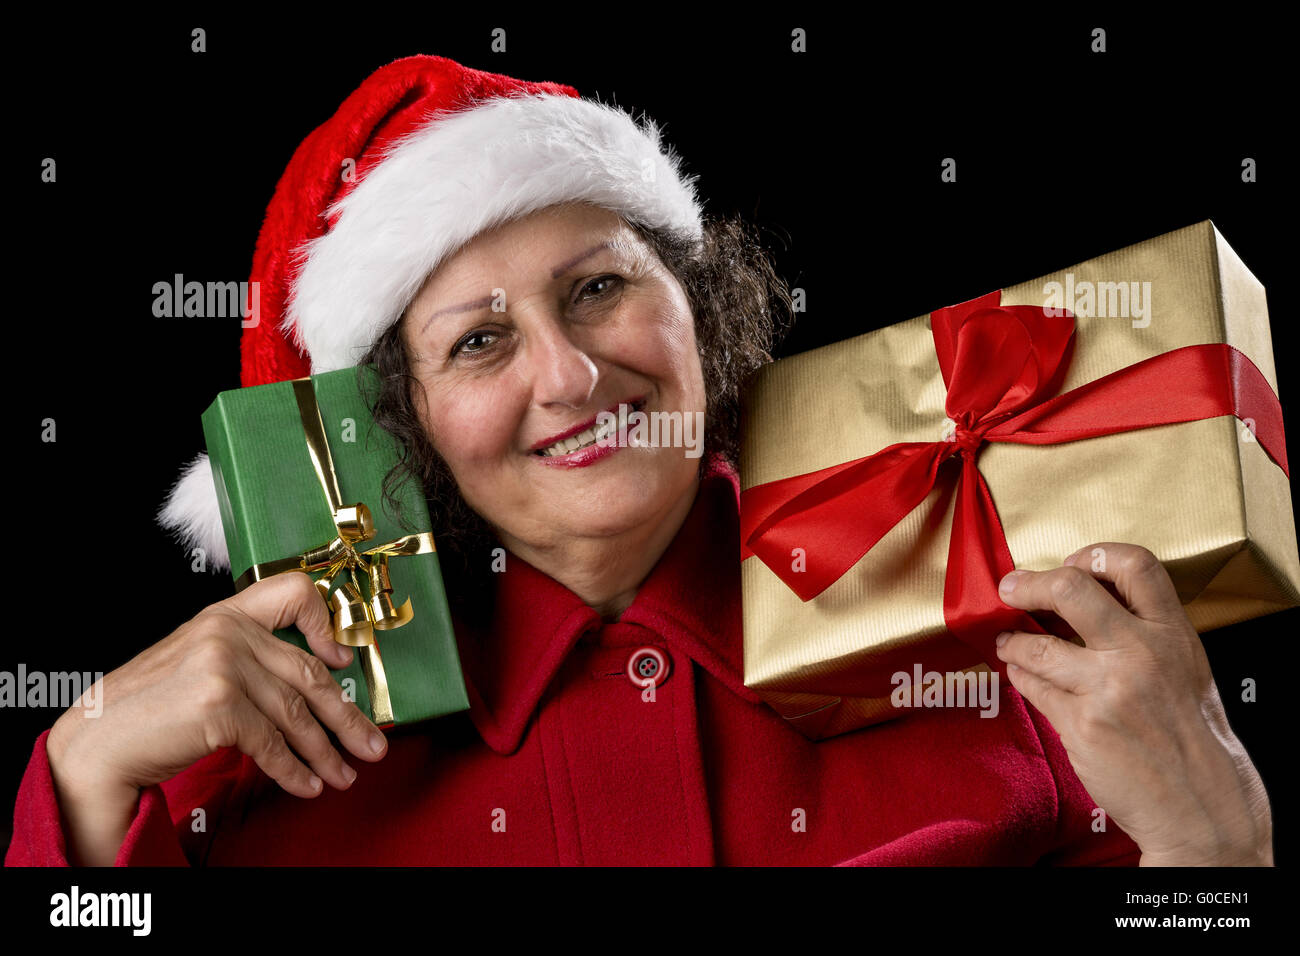 Smiling Lady with Golden and Green Christmas Gifts Stock Photo